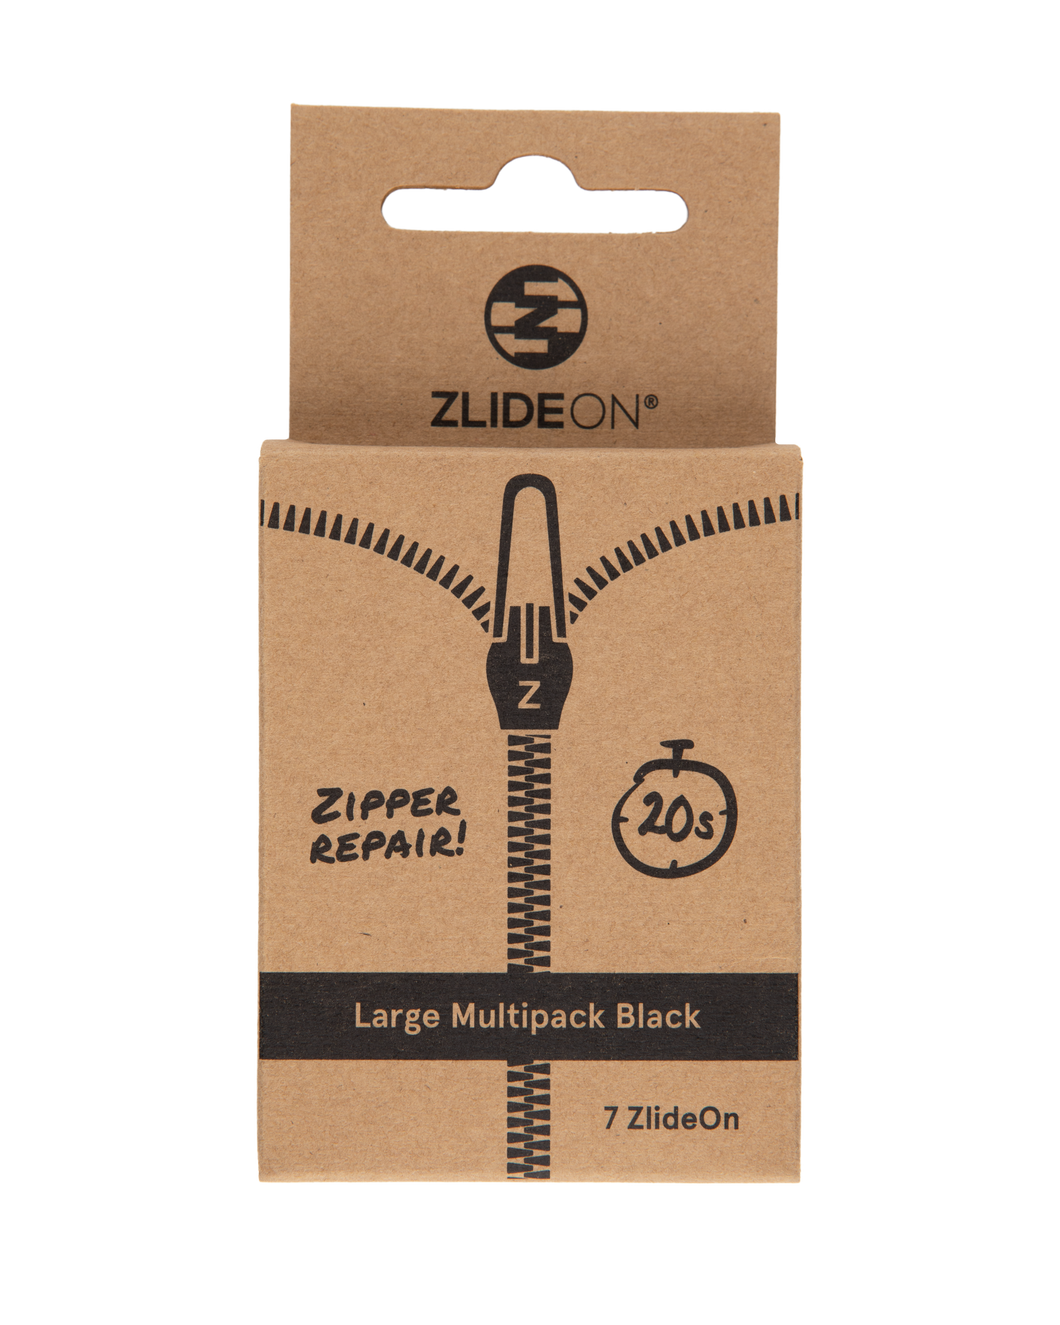 Large Multipack is brilliant to have at home. In a Large Multipack you find our bestselling sizes of ZlideOn and you can repair most zippers.